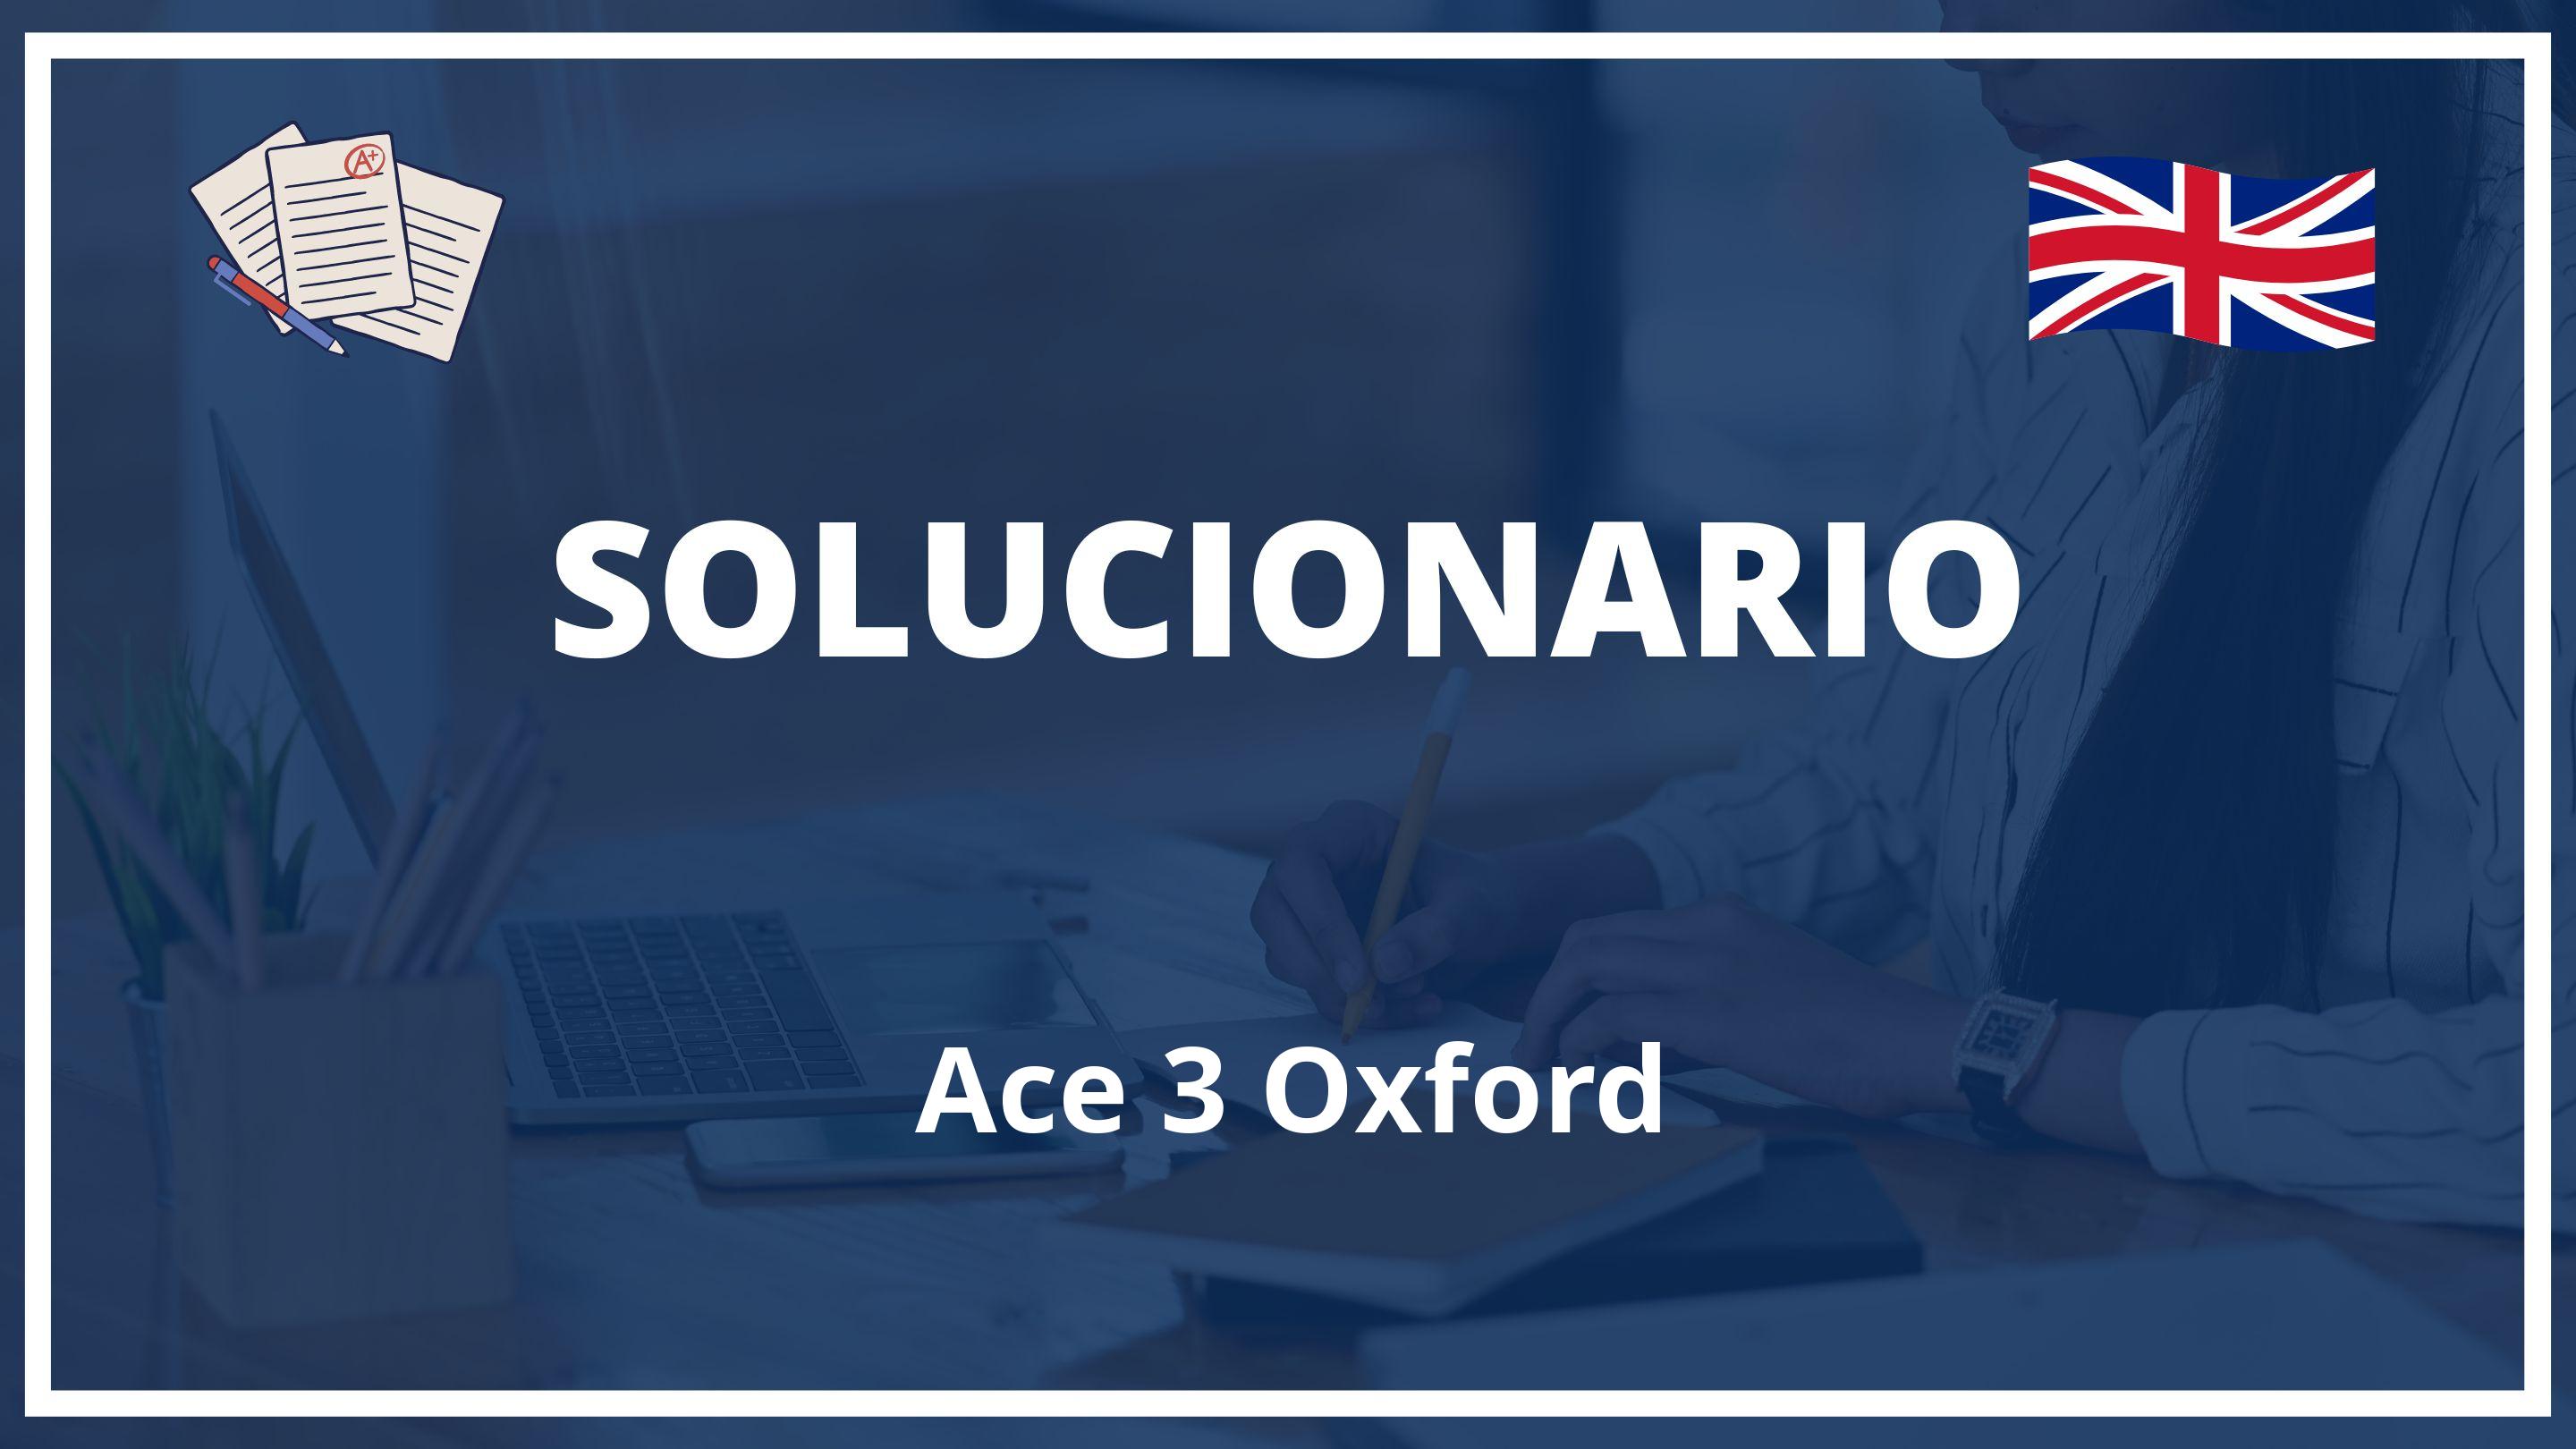 Ace 3 Oxford